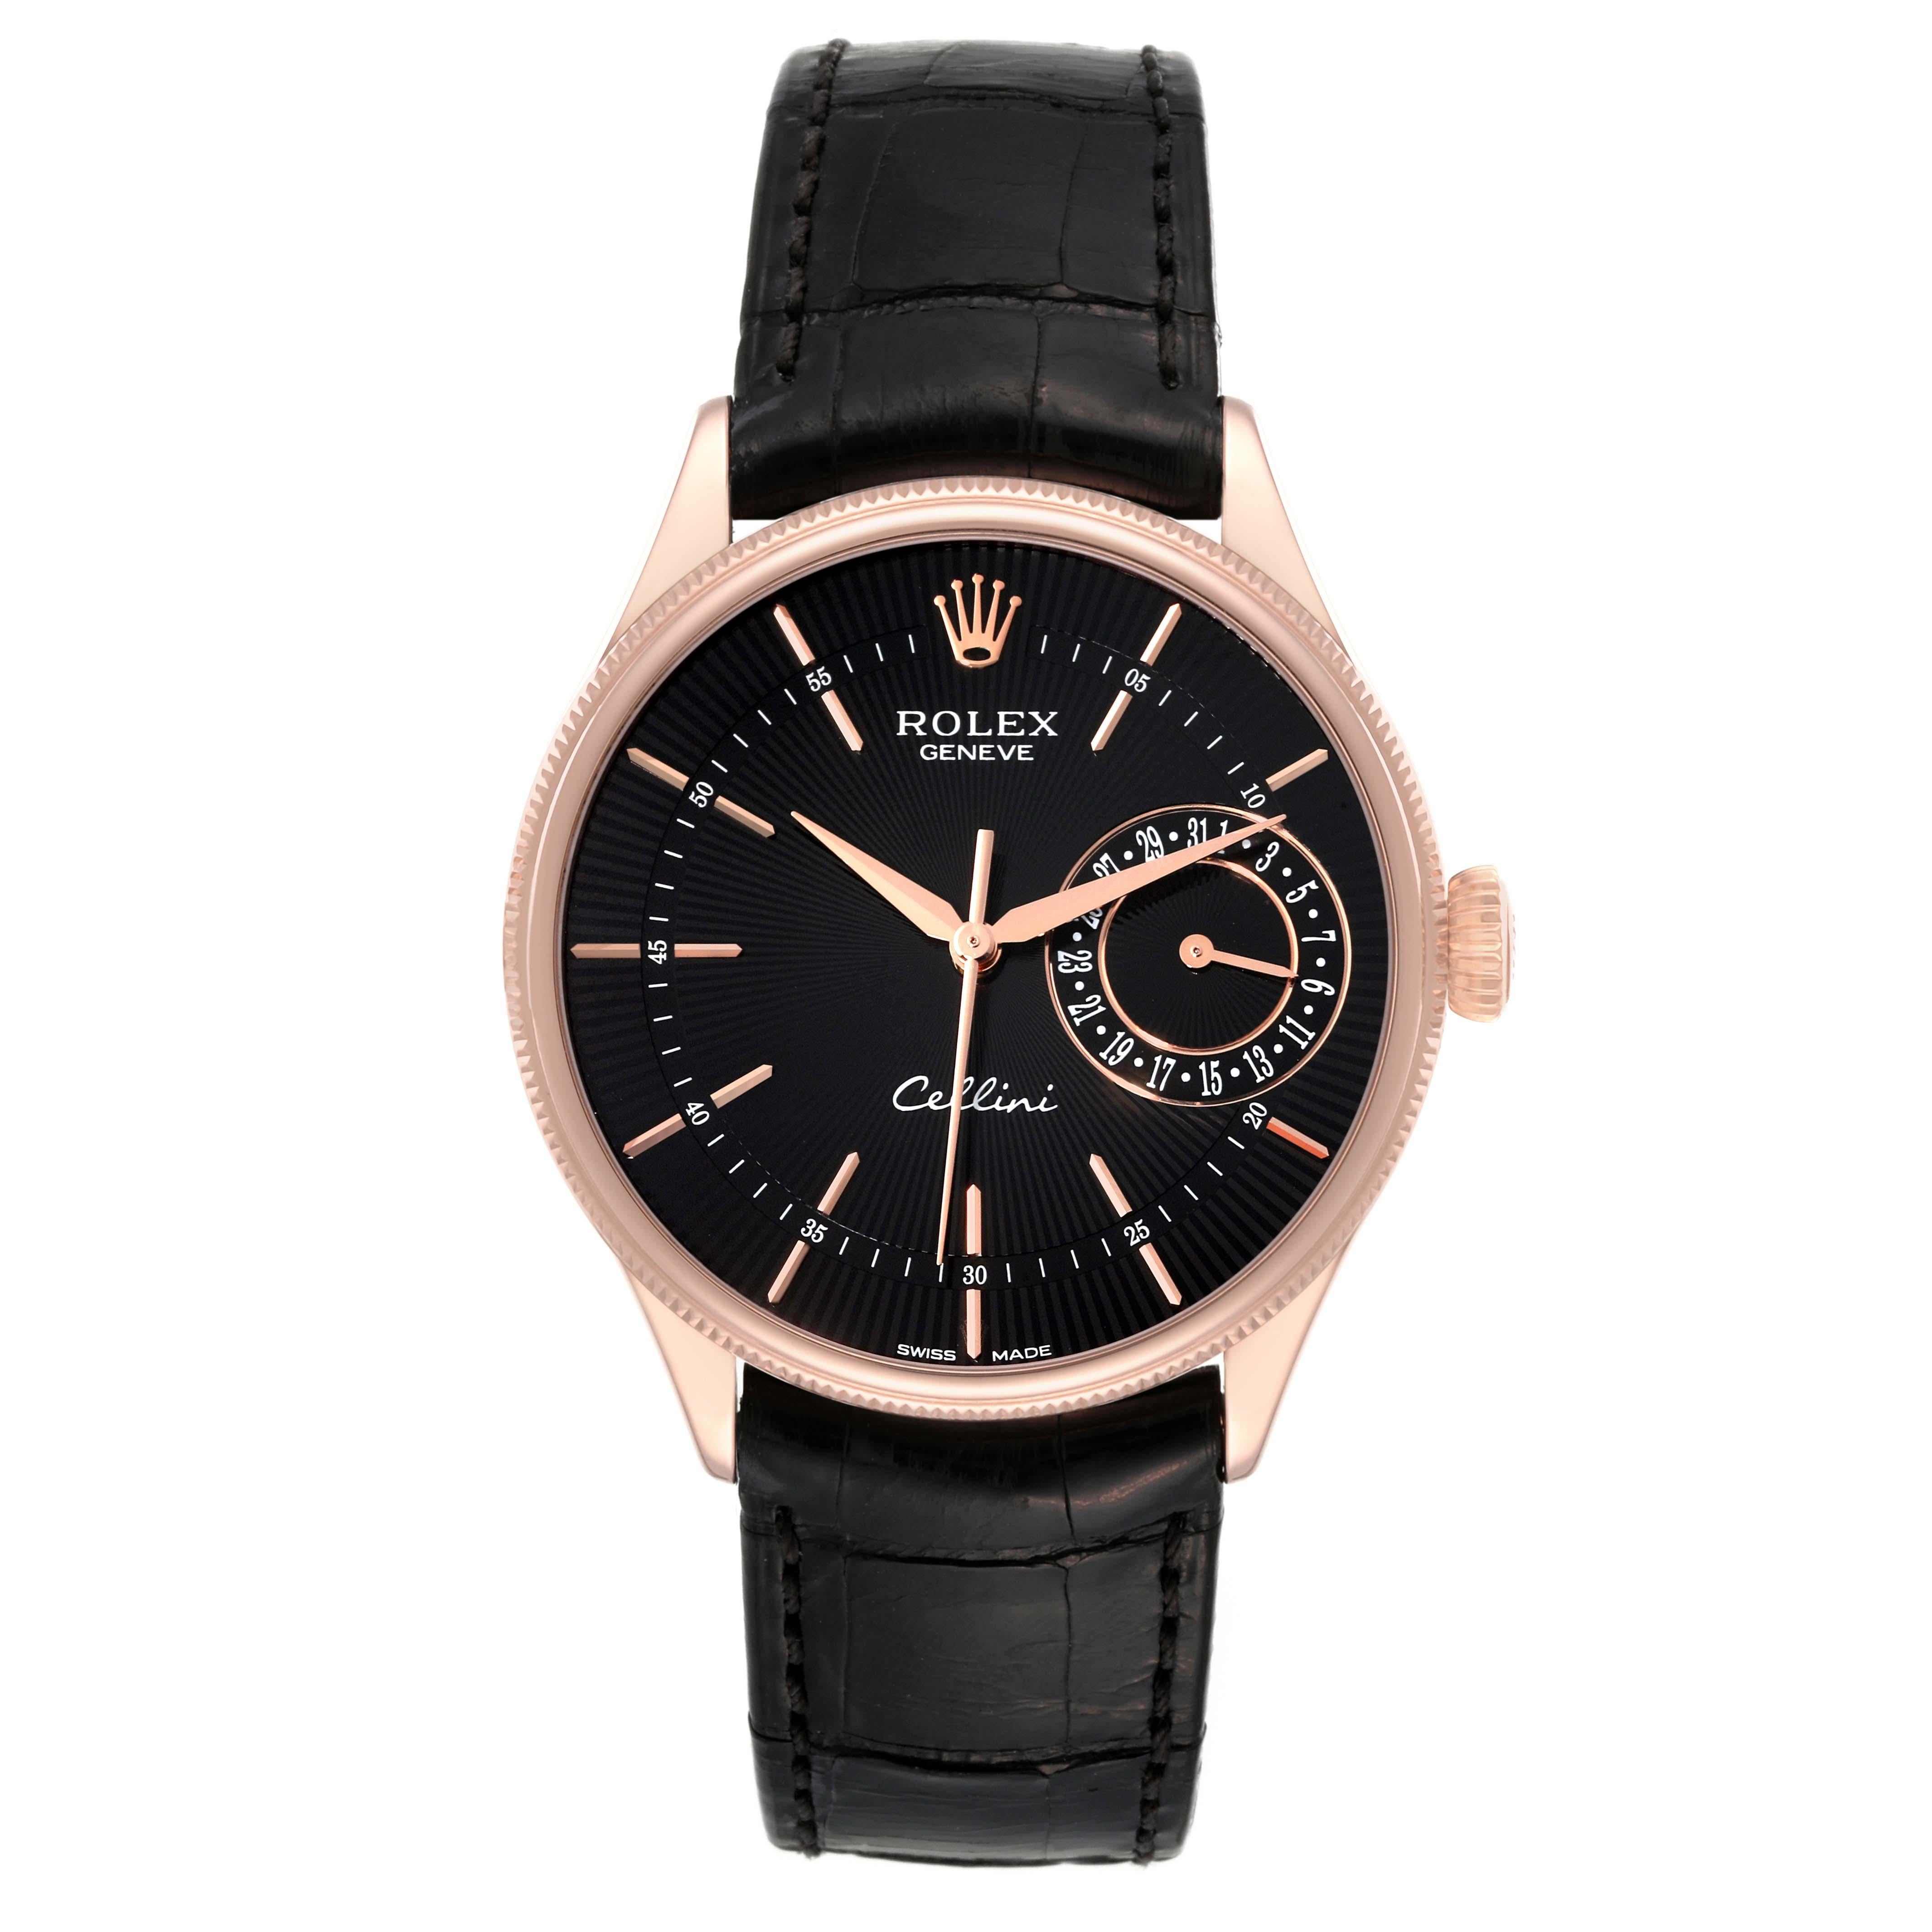 Rolex Cellini Date Everose Gold Black Dial Automatic Mens Watch 50515 Box Card. Automatic self-winding movement. Officially certified Swiss chronometer (COSC). Paramagnetic blue Parachrom hairspring. Bidirectional self-winding via Perpetual rotor.